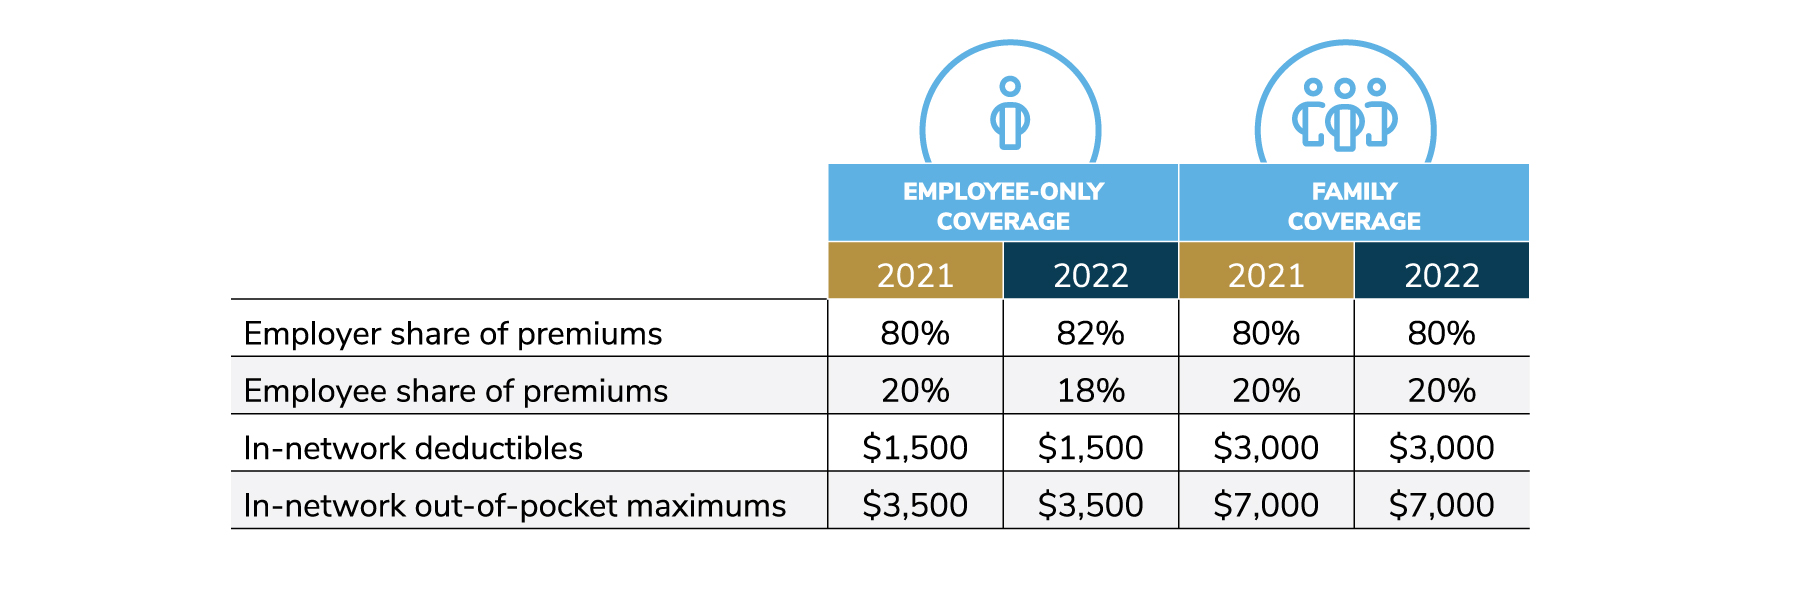 In 2022, employers will pay for 82% of premiums for employee-only coverage (80% for family coverage). In-network deductibles of $1,500 for employee-only coverage ($3,000 for family coverage). In-network OOP maximums of $3,500 for employee-only coverage ($7,000 for family coverage).